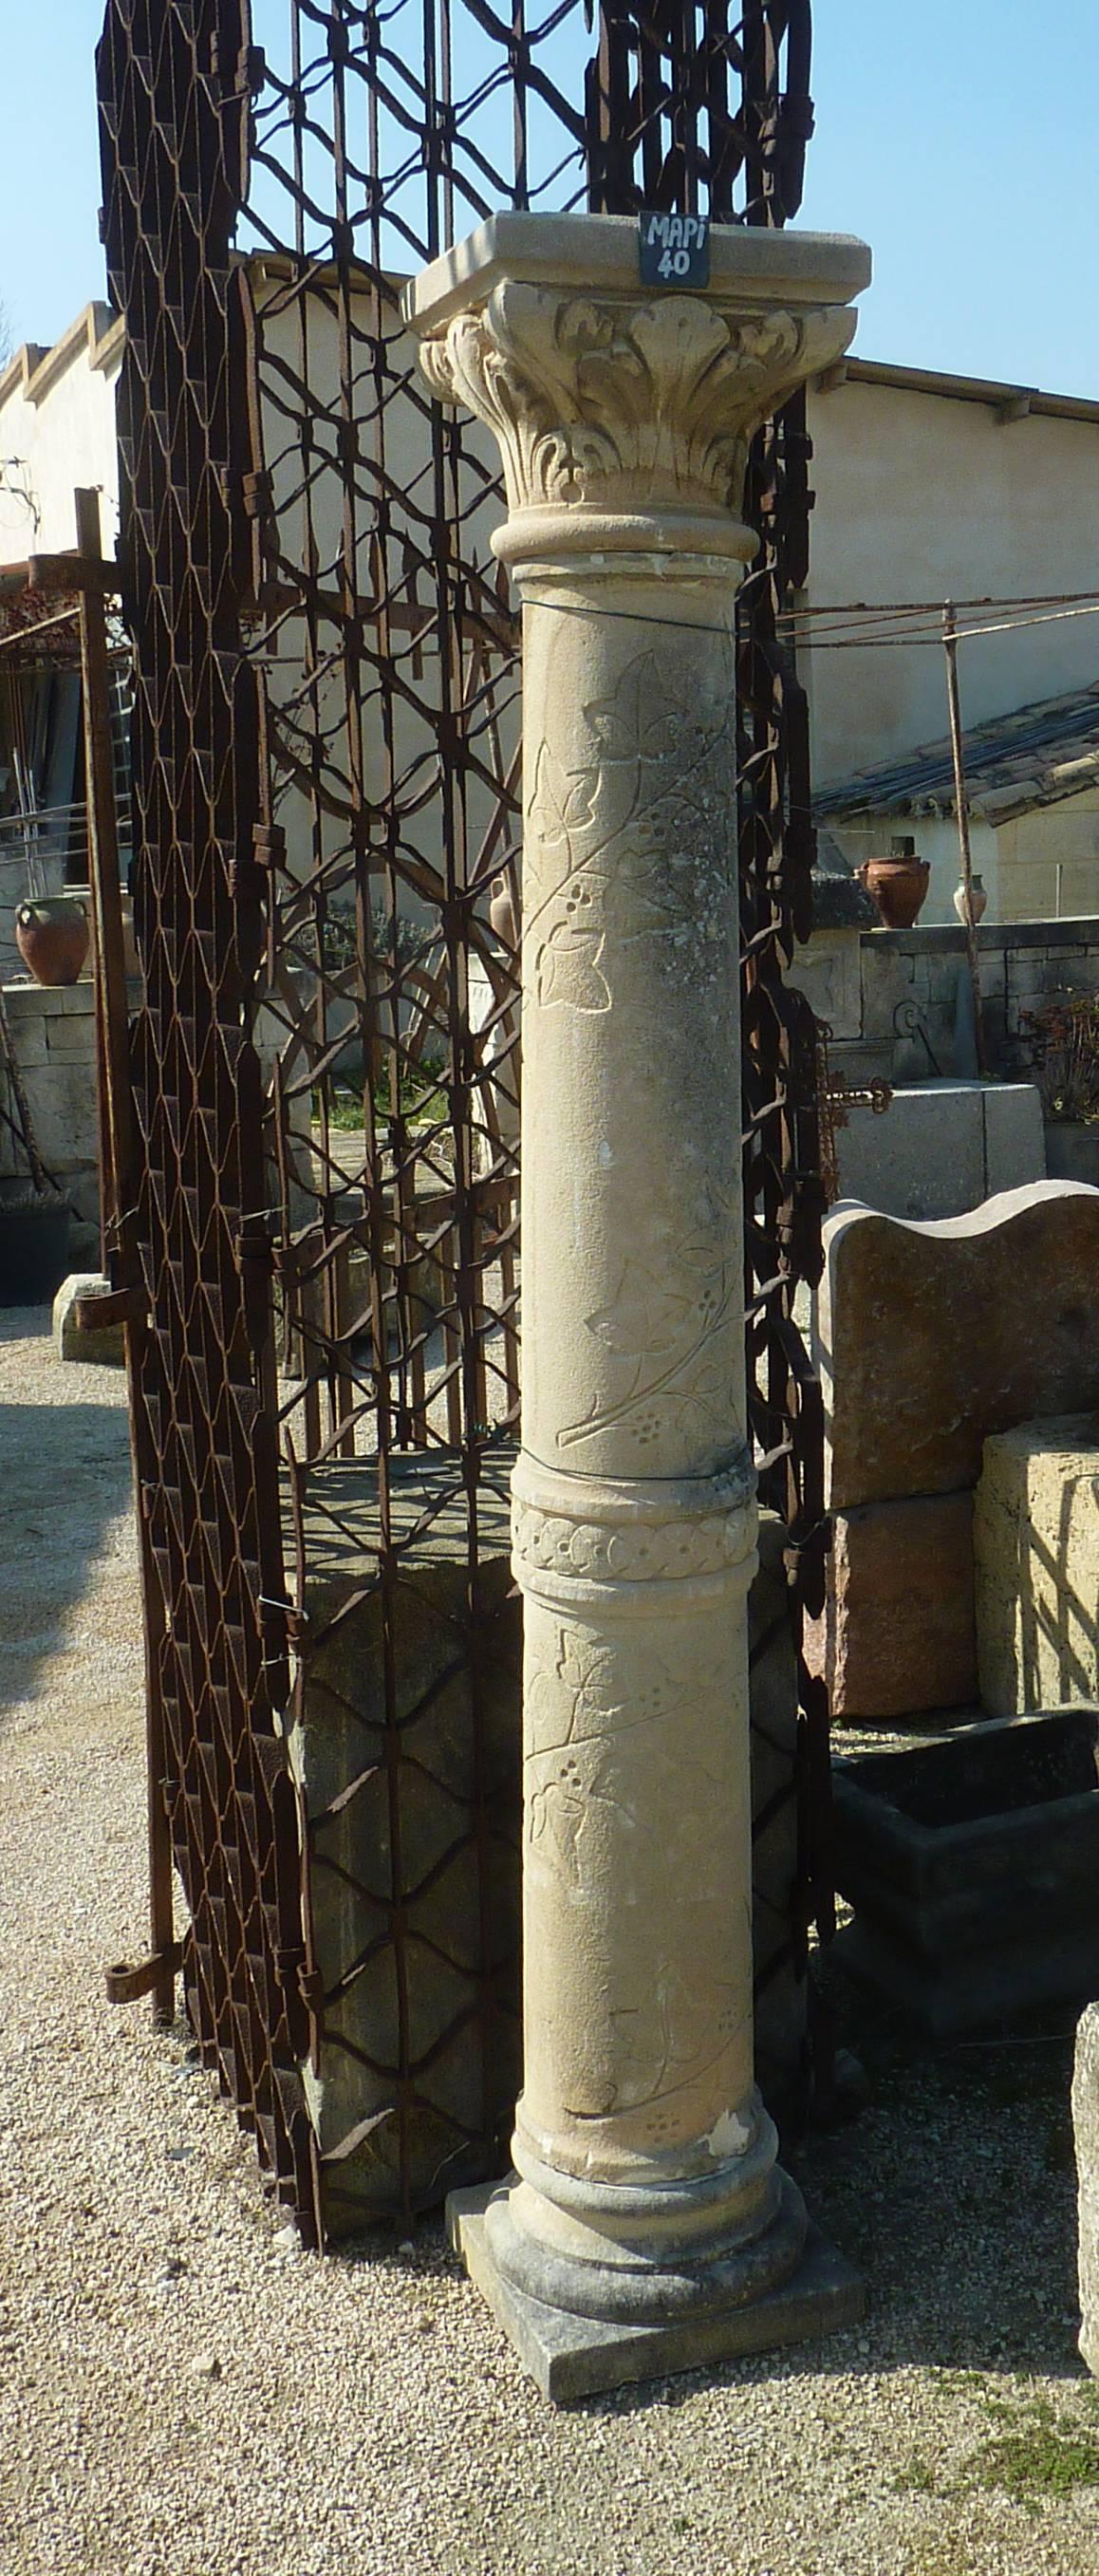 Hand-carved into a quality natural limestone, each column offers a beautiful warm-toned patina and features very finely sculpted details.

These columns sit on square bases. Each one features beautiful bolection style moldings and Fine sculpted